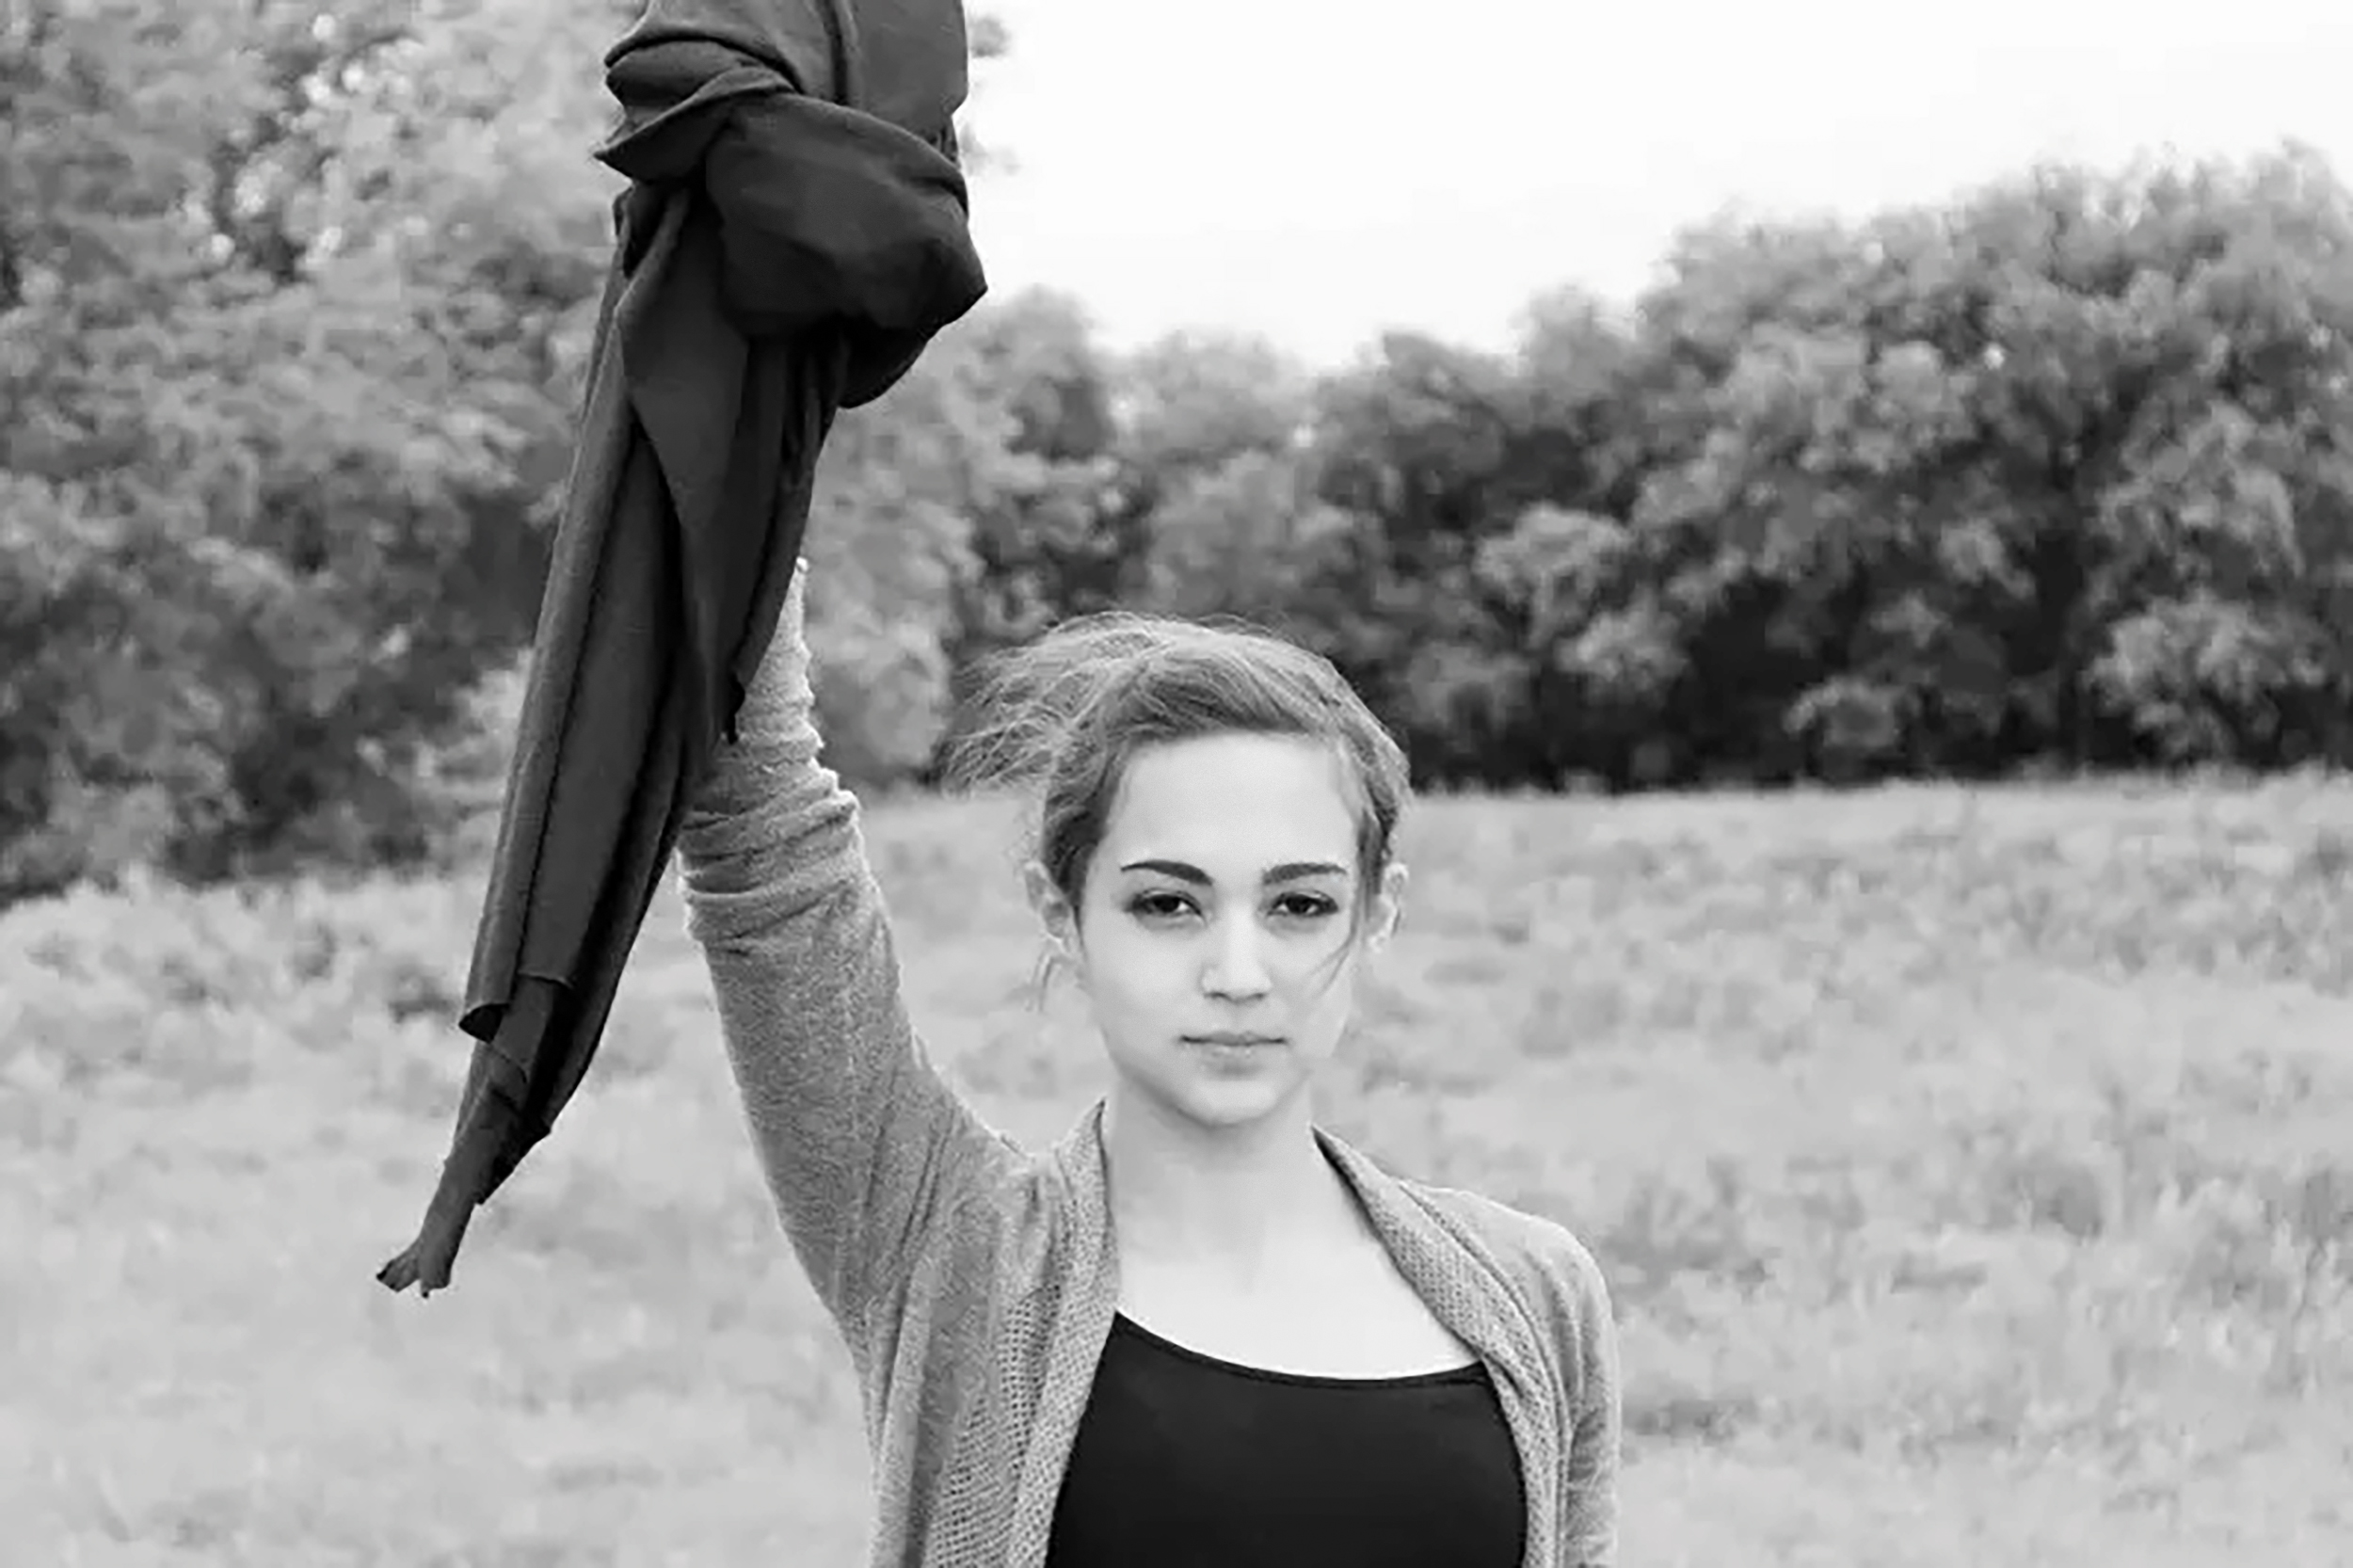 The Liberty Foundation - About - Iranian woman protesting by removing their hijab